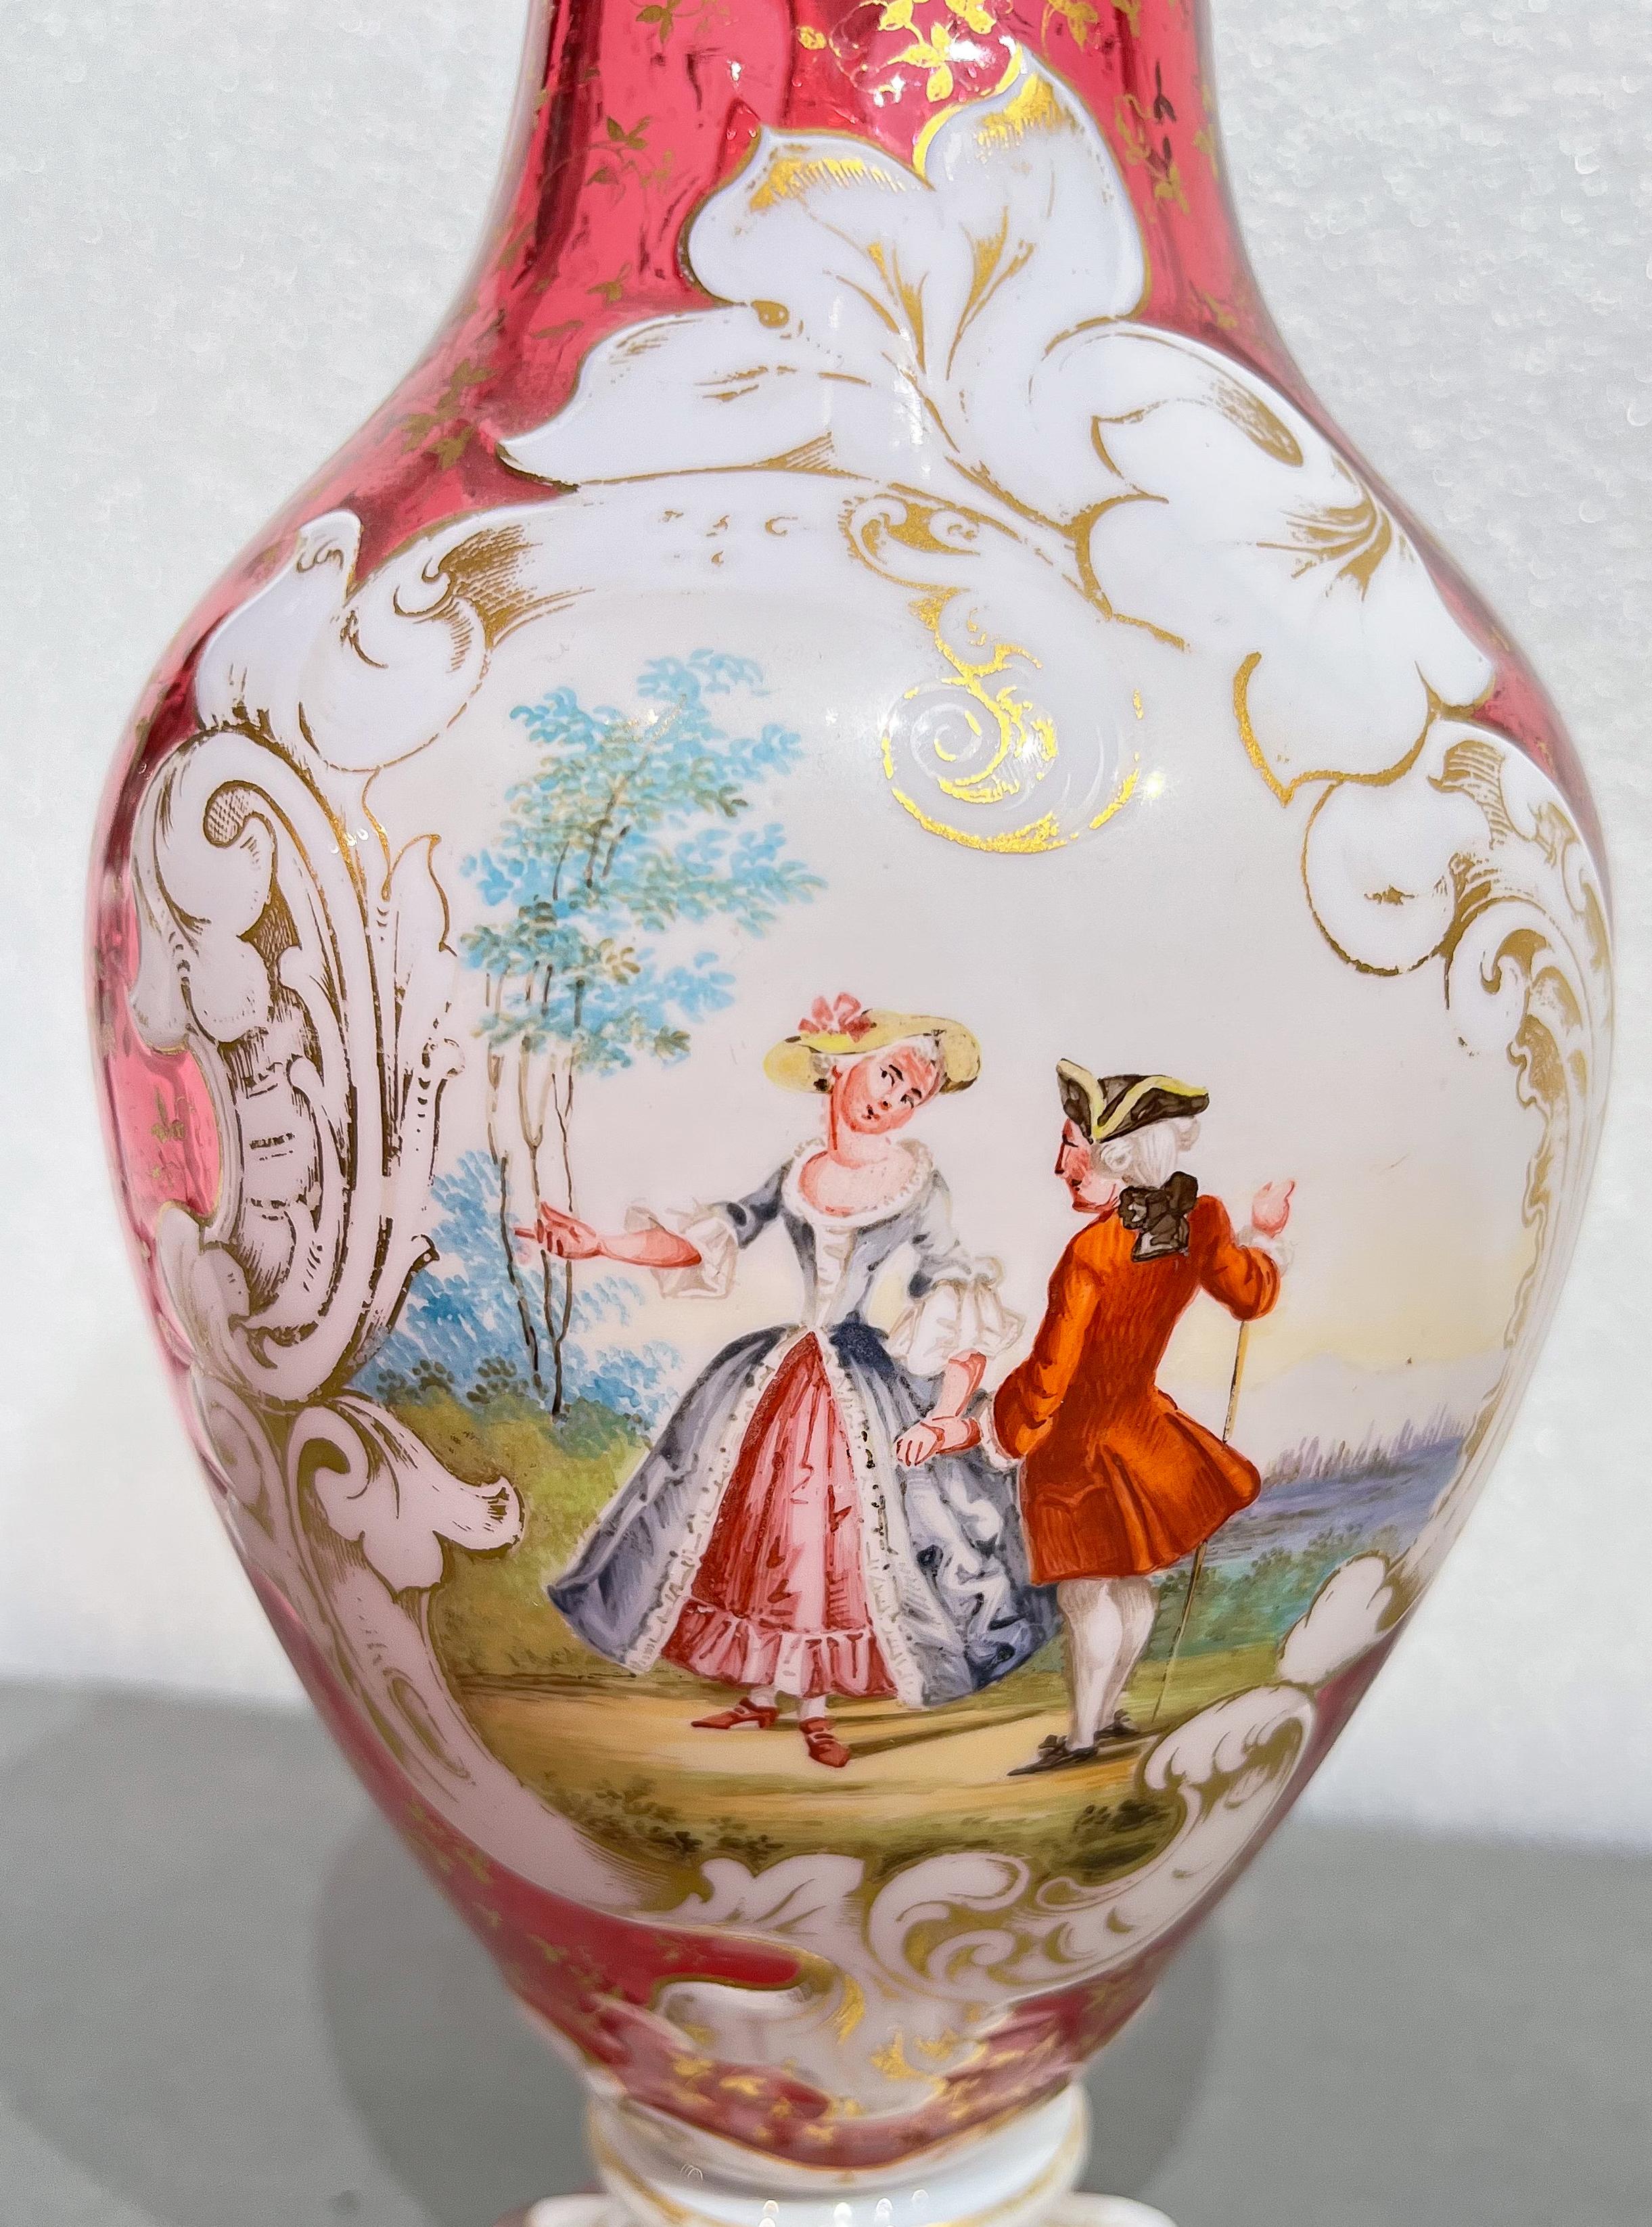 Handmade Bohemian watermelon glass pitcher with white enamel and jewel painted floral butterflies throughout. A sweet courting scene in a garden is hand painted on the enamel which is also accented with gold paint.

Origin: Czech Republic (Bohemia) 